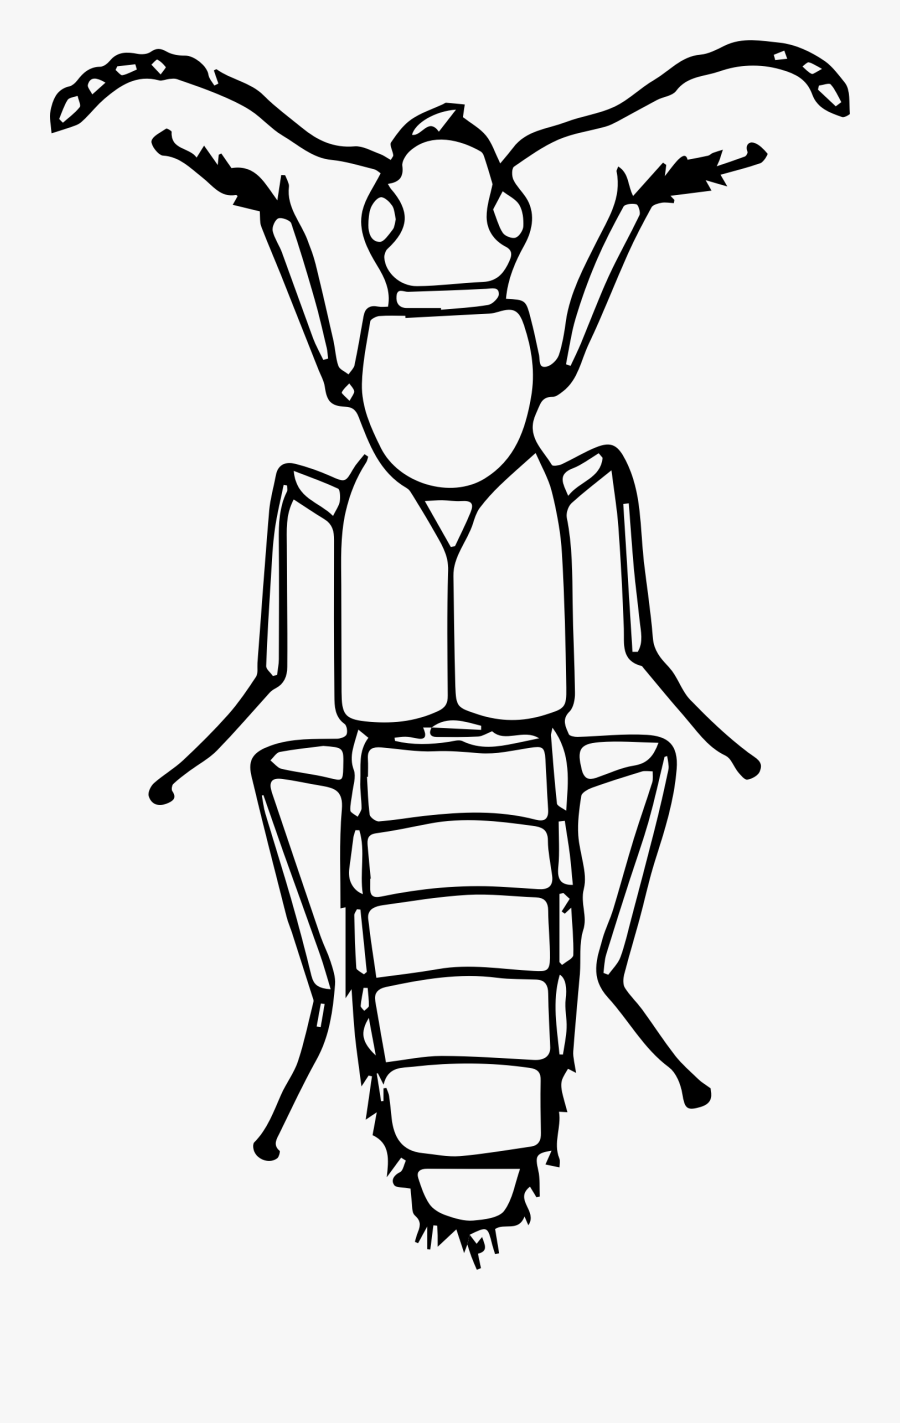 Transparent Bugs Clipart Black And White - Insect Clipart Black And White, Transparent Clipart